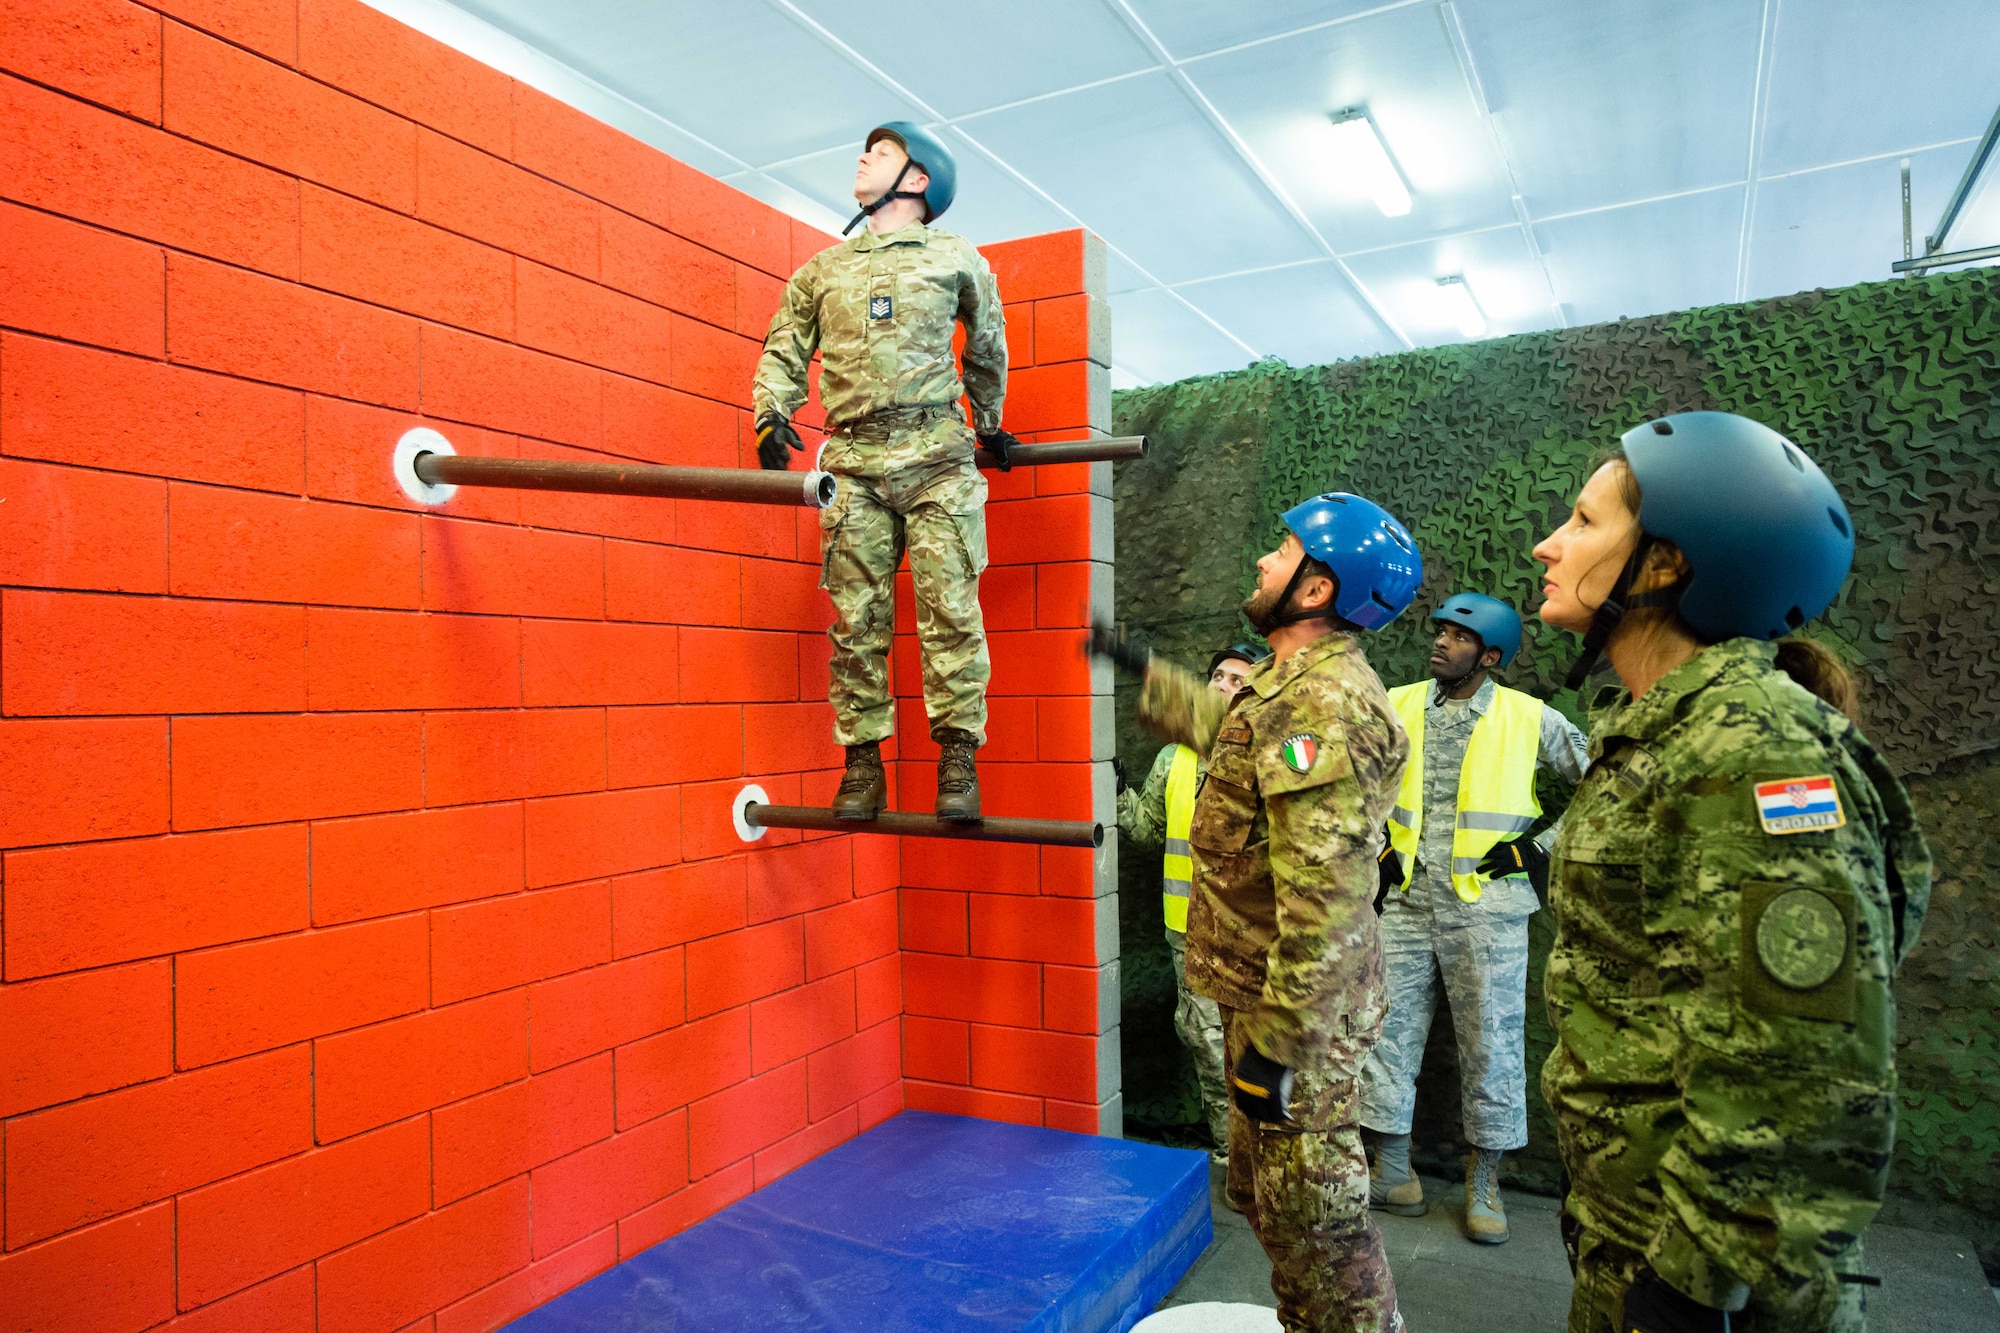 Flight Sgt. Mark Moore, Royal Air Force (left) participates in a leadership reaction course task while attending the Inter-European Noncommissioned Officer Academy at Kapaun Air Station, Germany, Nov. 6, 2019. Flight Sgt. Moore is one of two first time students from the United Kingdom to attend this course. Two courses, the Inter-European Squadron Officer School and Noncommissioned Officer Academy were attended by 44 officers and enlisted from 21 different countries. (Courtesy Photo)